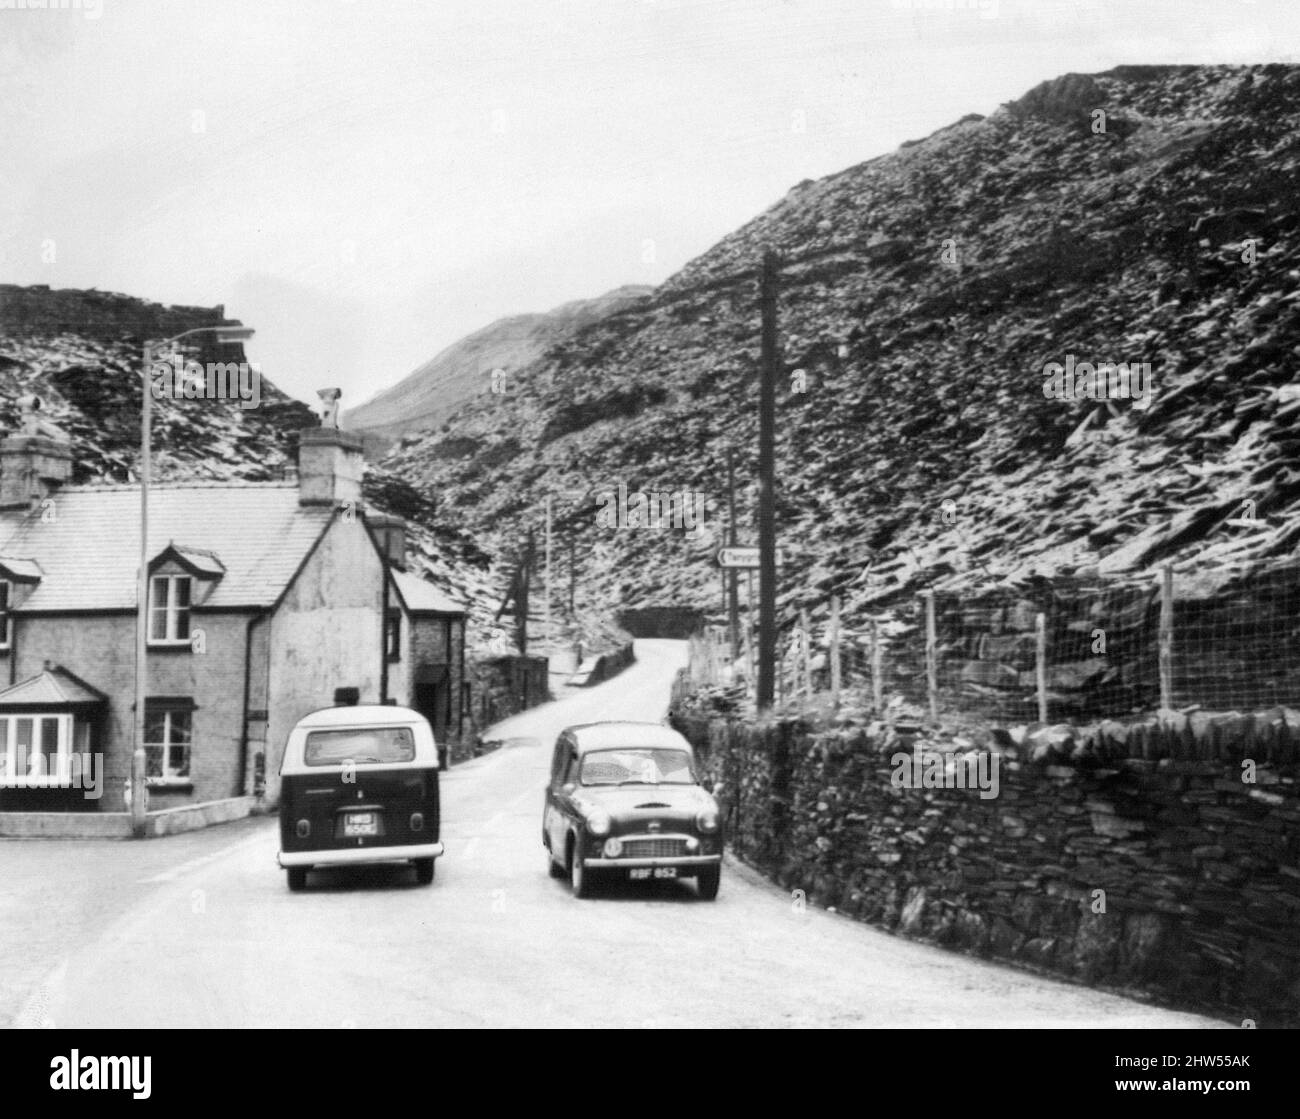 Blaenau Ffestiniog is a historic mining town in the historic county of Merionethshire, Wales, 7th September 1967.  Our Picture Shows ... the main road from Blaenau Ffestiniog to the Crimea Pass, cutting through the mountain of slate spoil where a  seeding experiment is taking place. Stock Photo